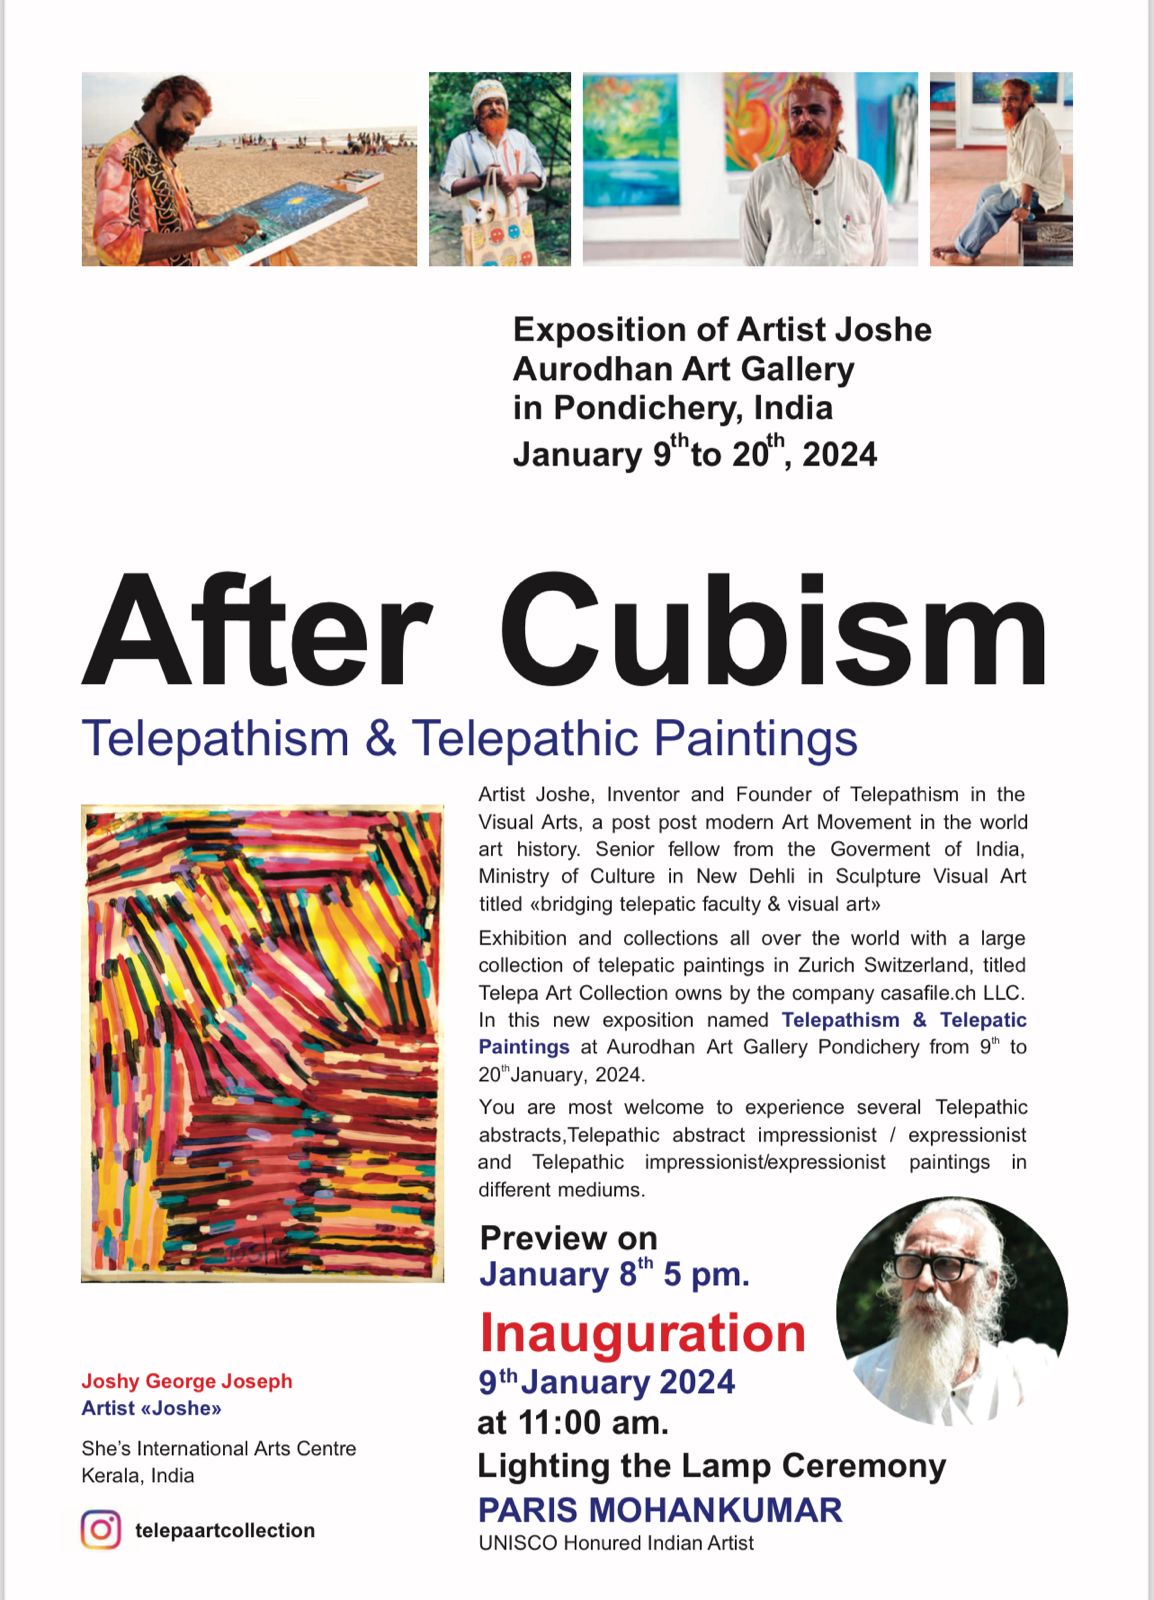 After Cubism art exhibition of telepathic paintings at Aurodhan Art Gallery in Pondicherry